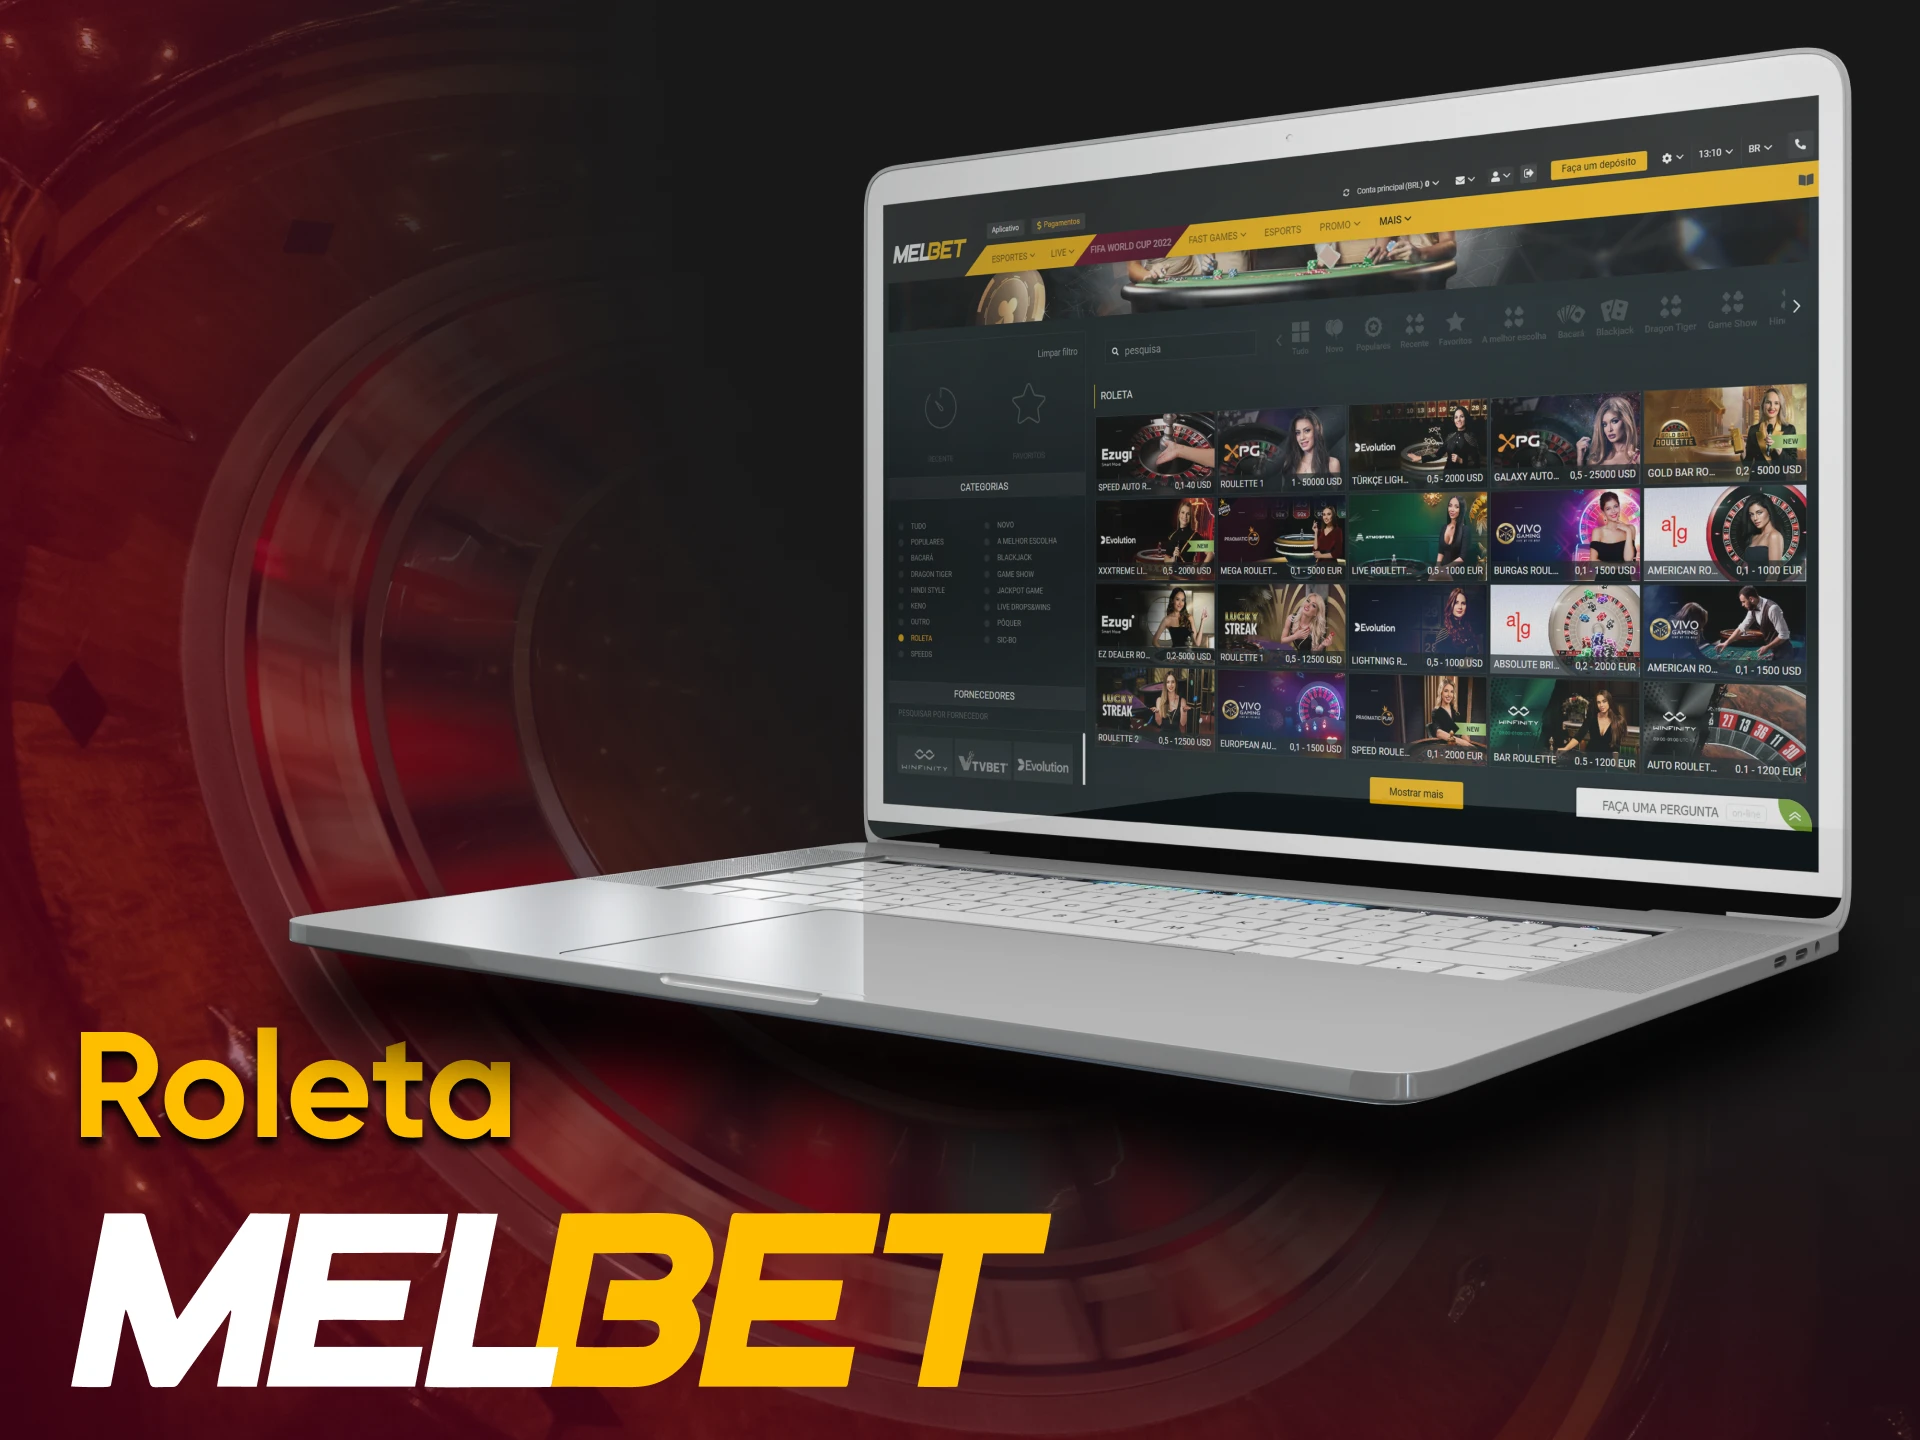 To play Melbet Roulette, go to the desired section.